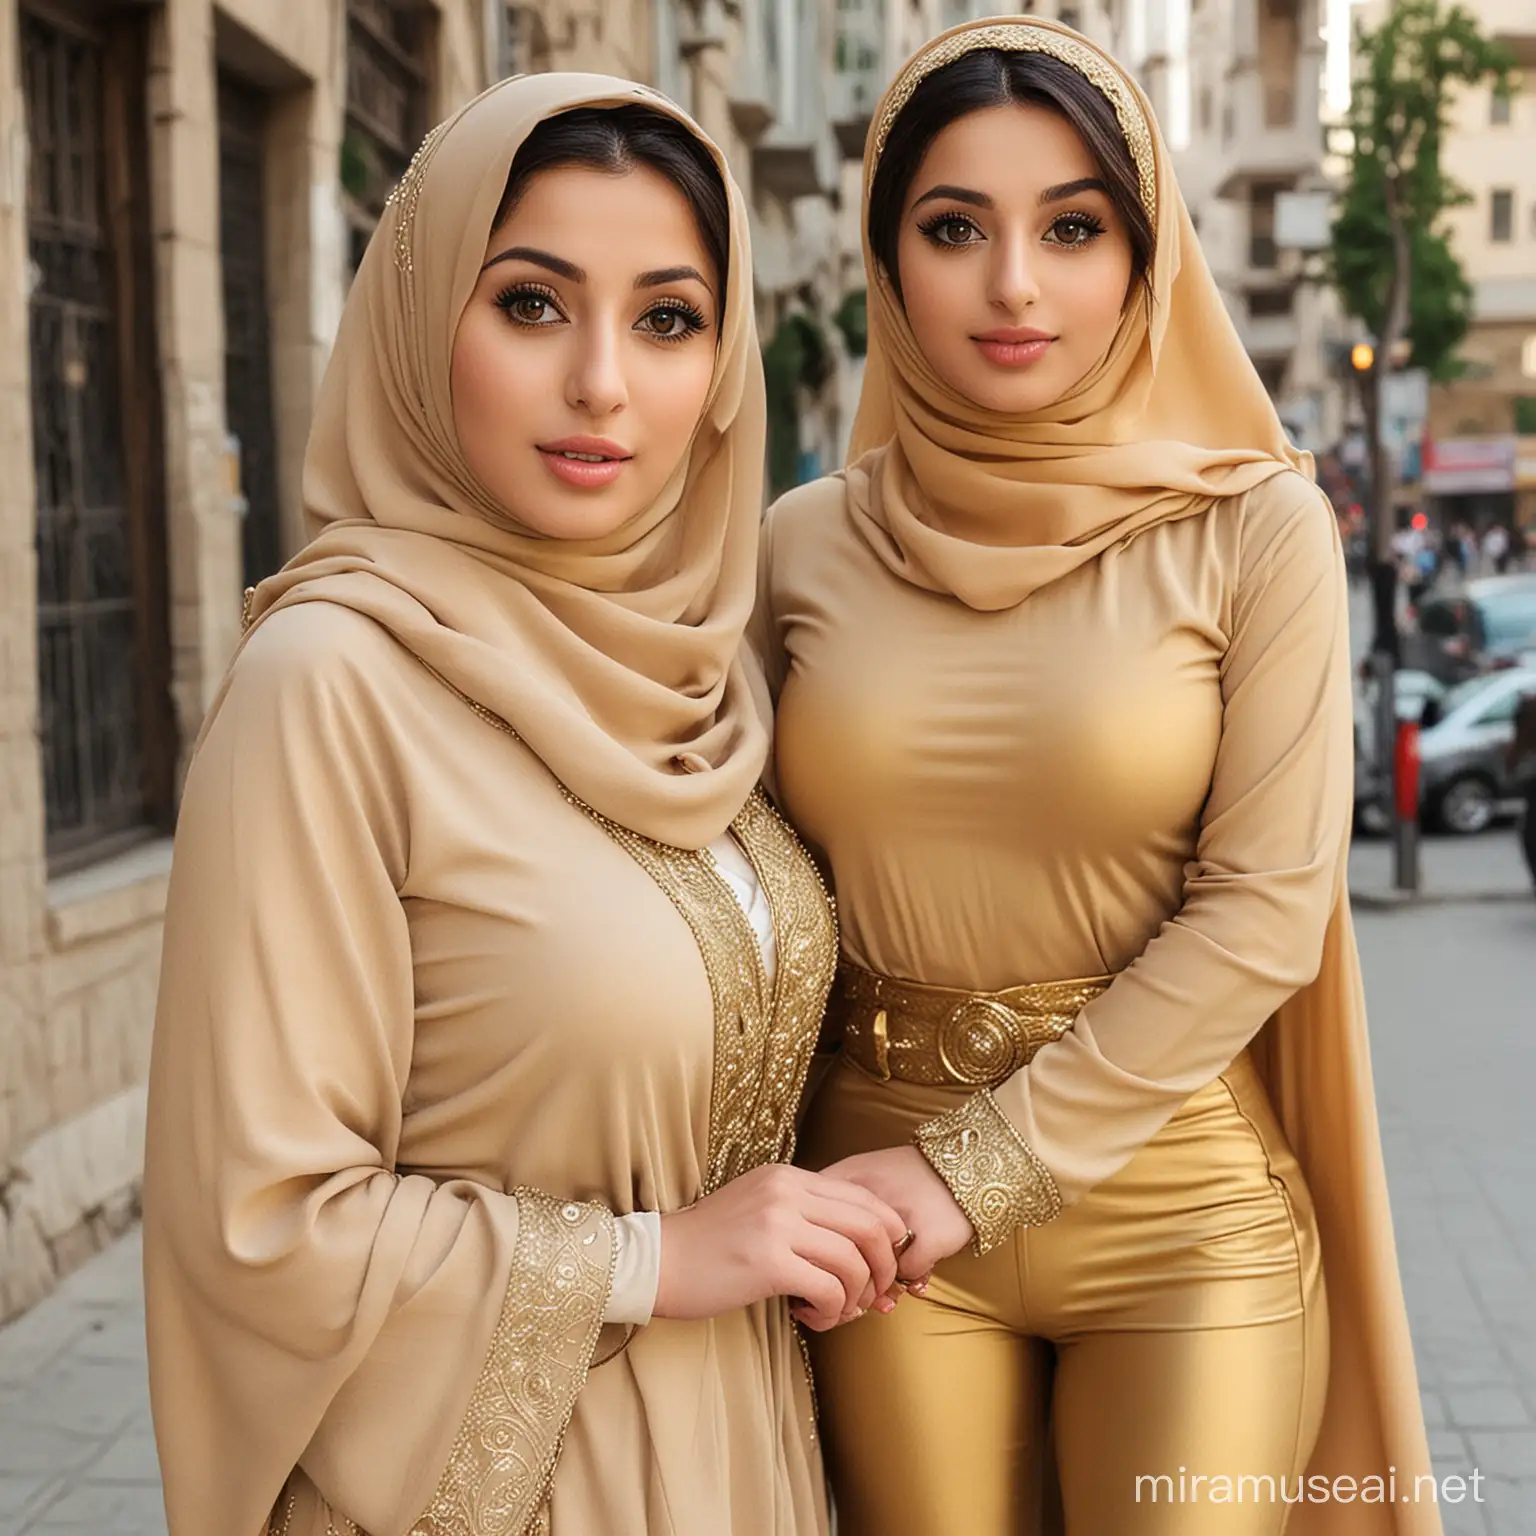 Stylish Iranian Woman with Golden Hijab and High Heels